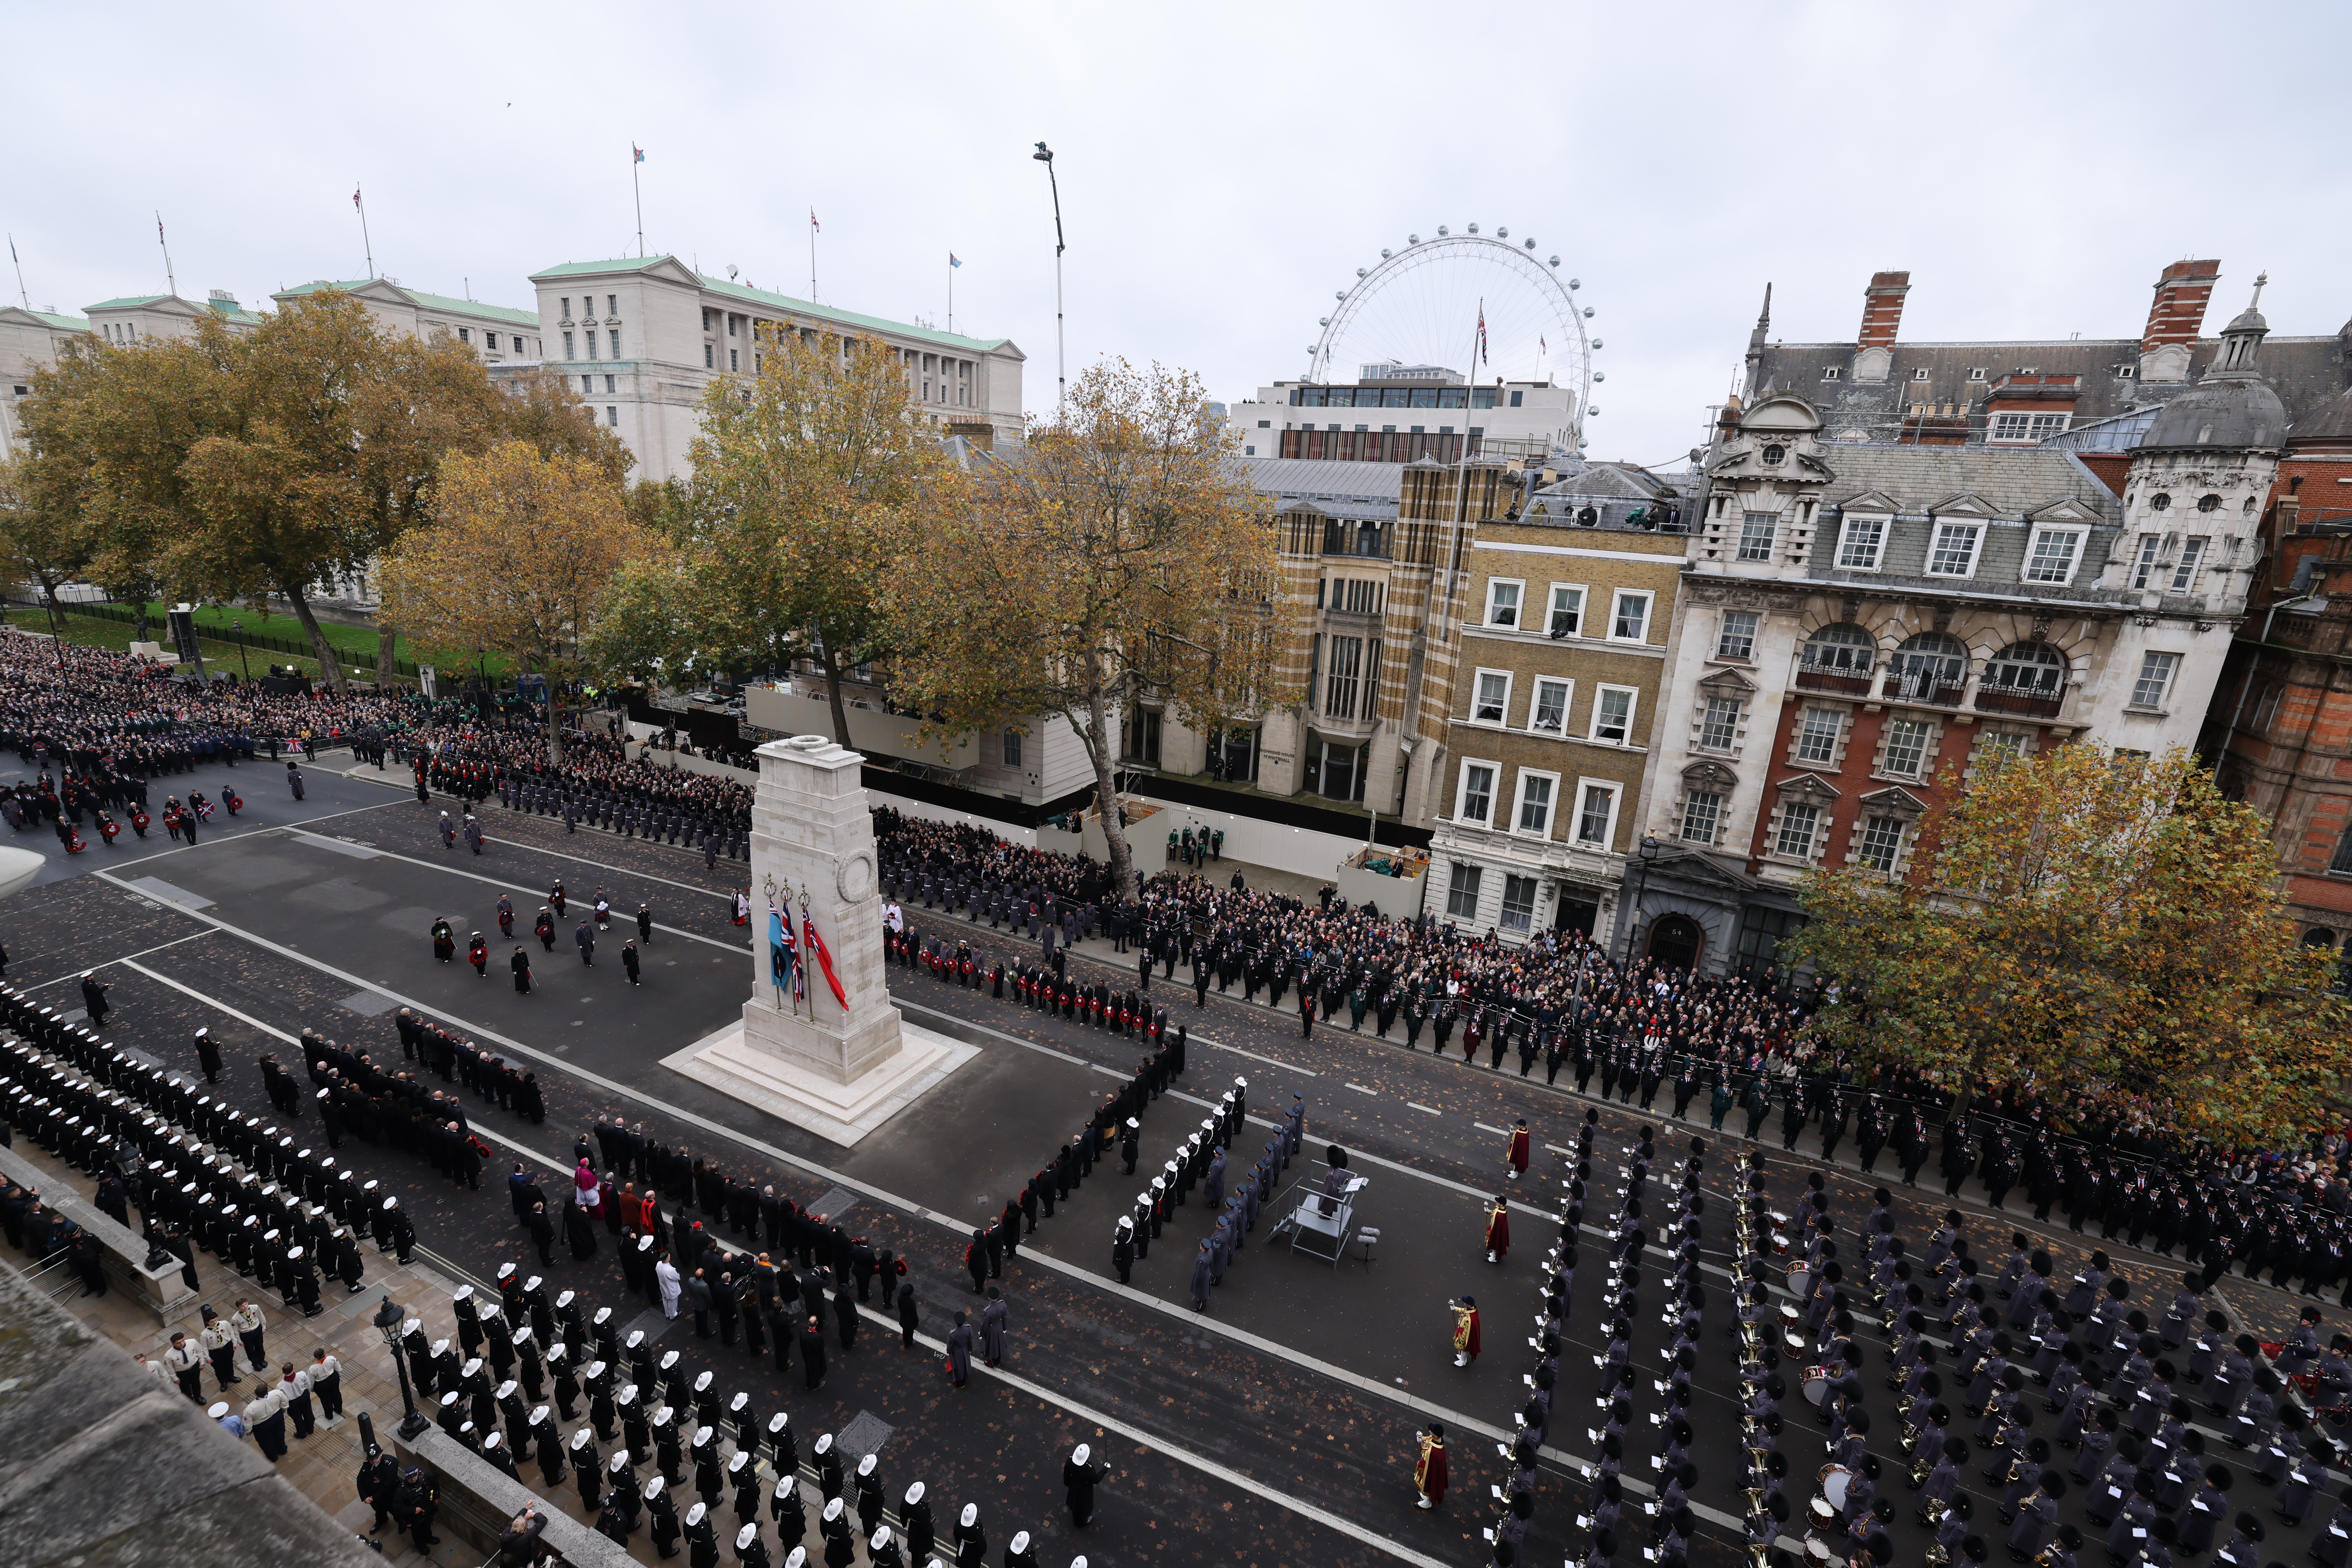 View over the Cenotaph during parade.